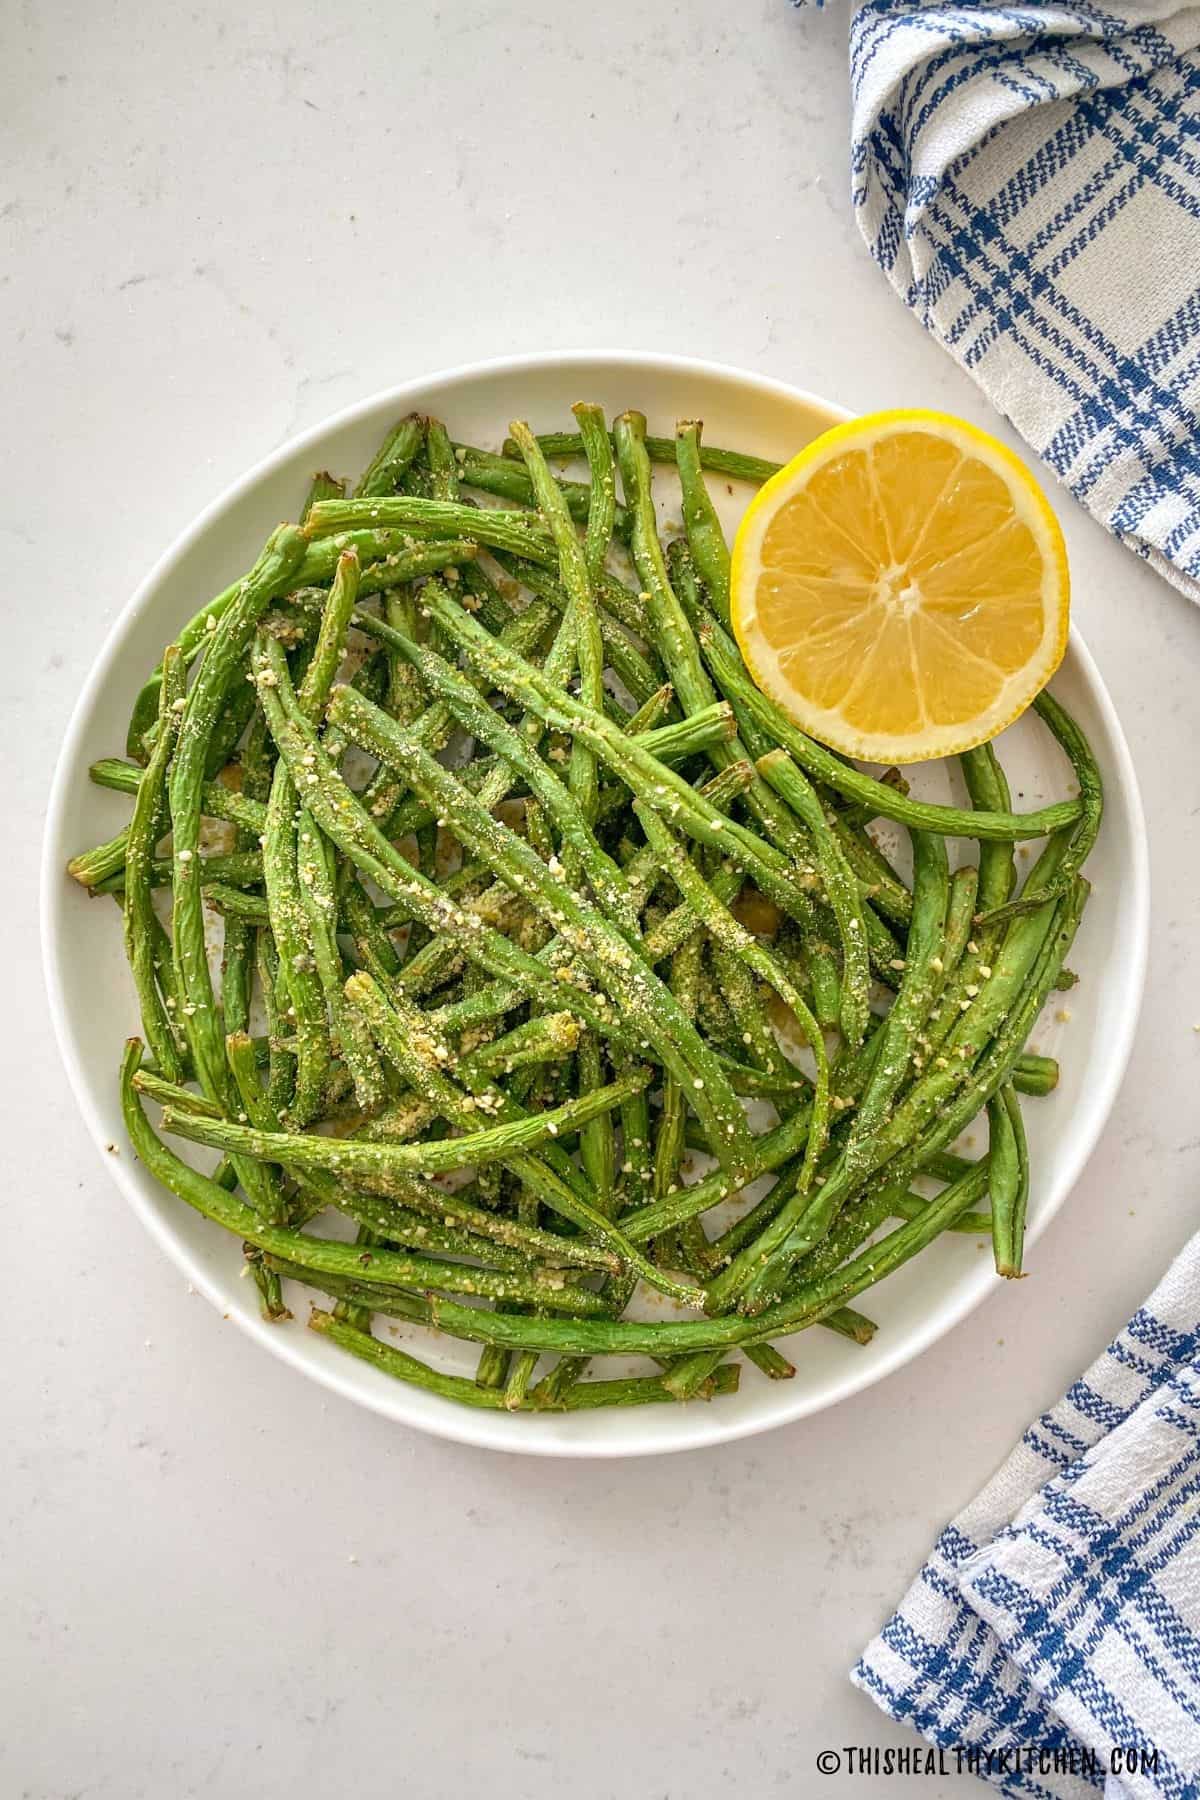 Cooked green beans in white plate with lemon on the side.